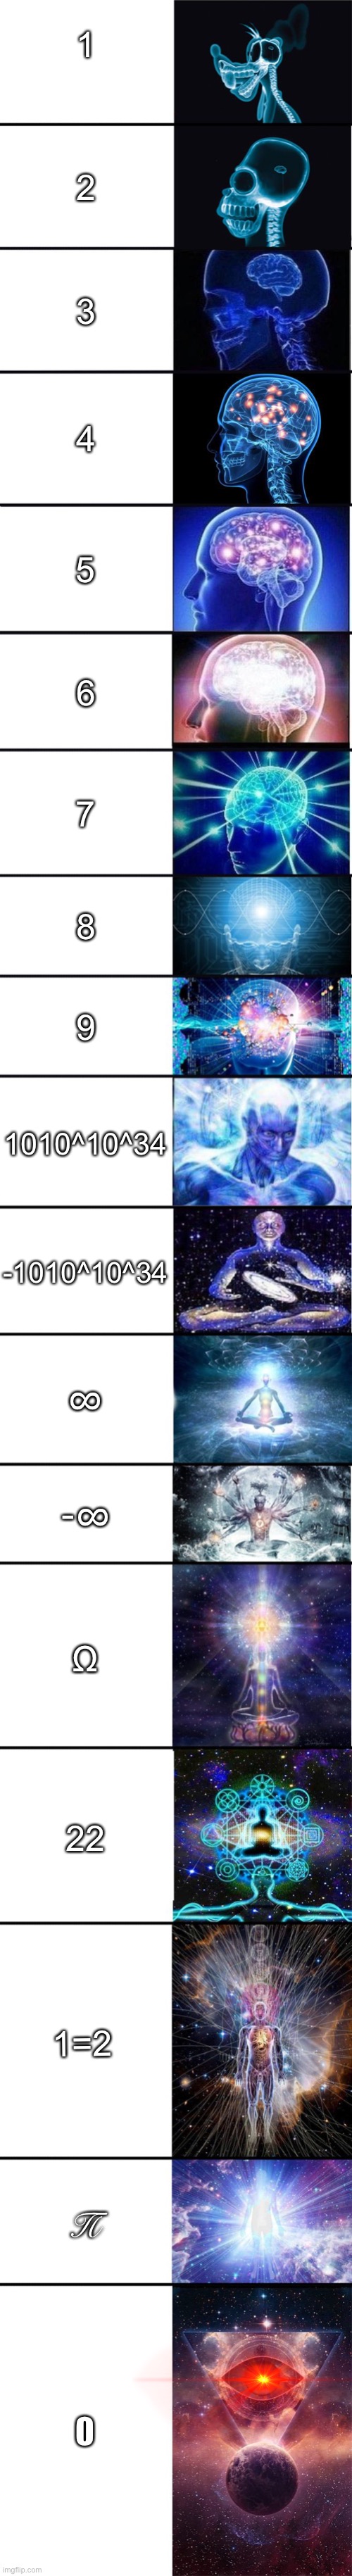 Math be like |  1; 2; 3; 4; 5; 6; 7; 8; 9; 1010^10^34; -1010^10^34; ∞; -∞; Ω; 22; 1=2; Π | image tagged in expanding brain 9001 | made w/ Imgflip meme maker